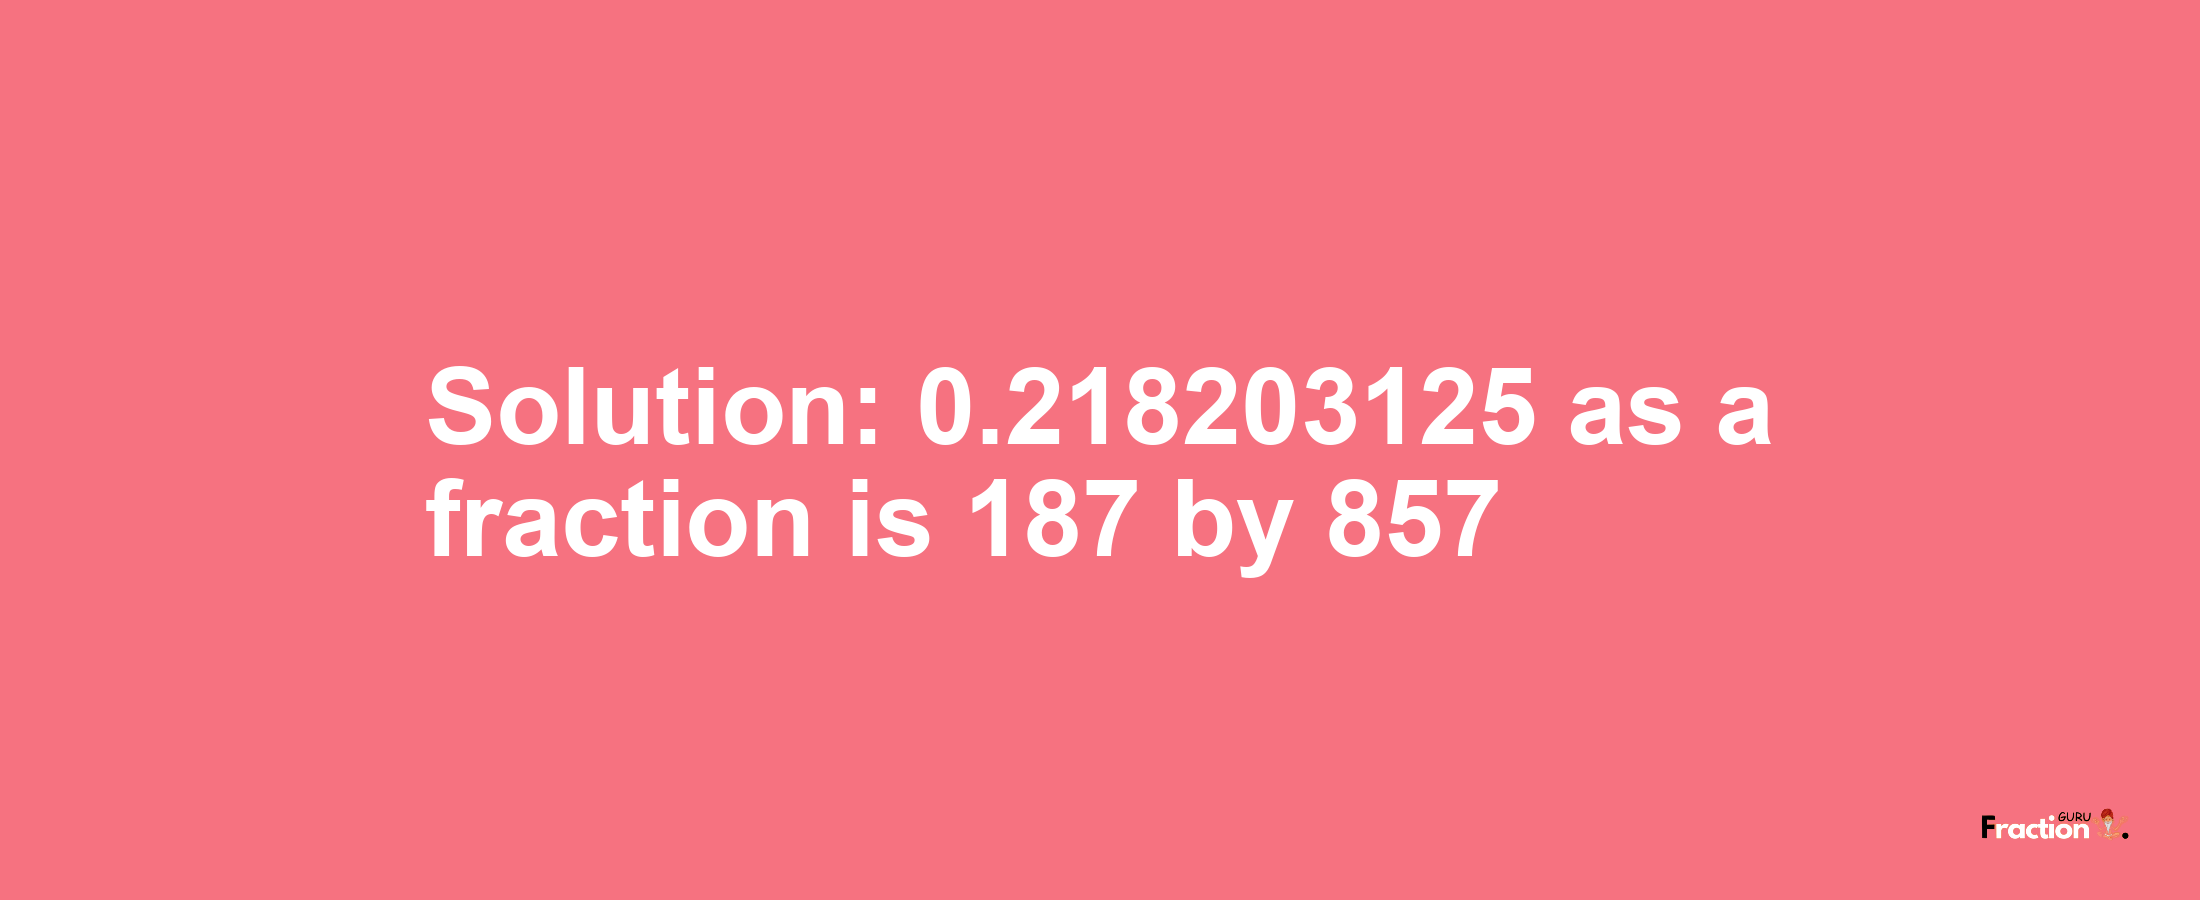 Solution:0.218203125 as a fraction is 187/857